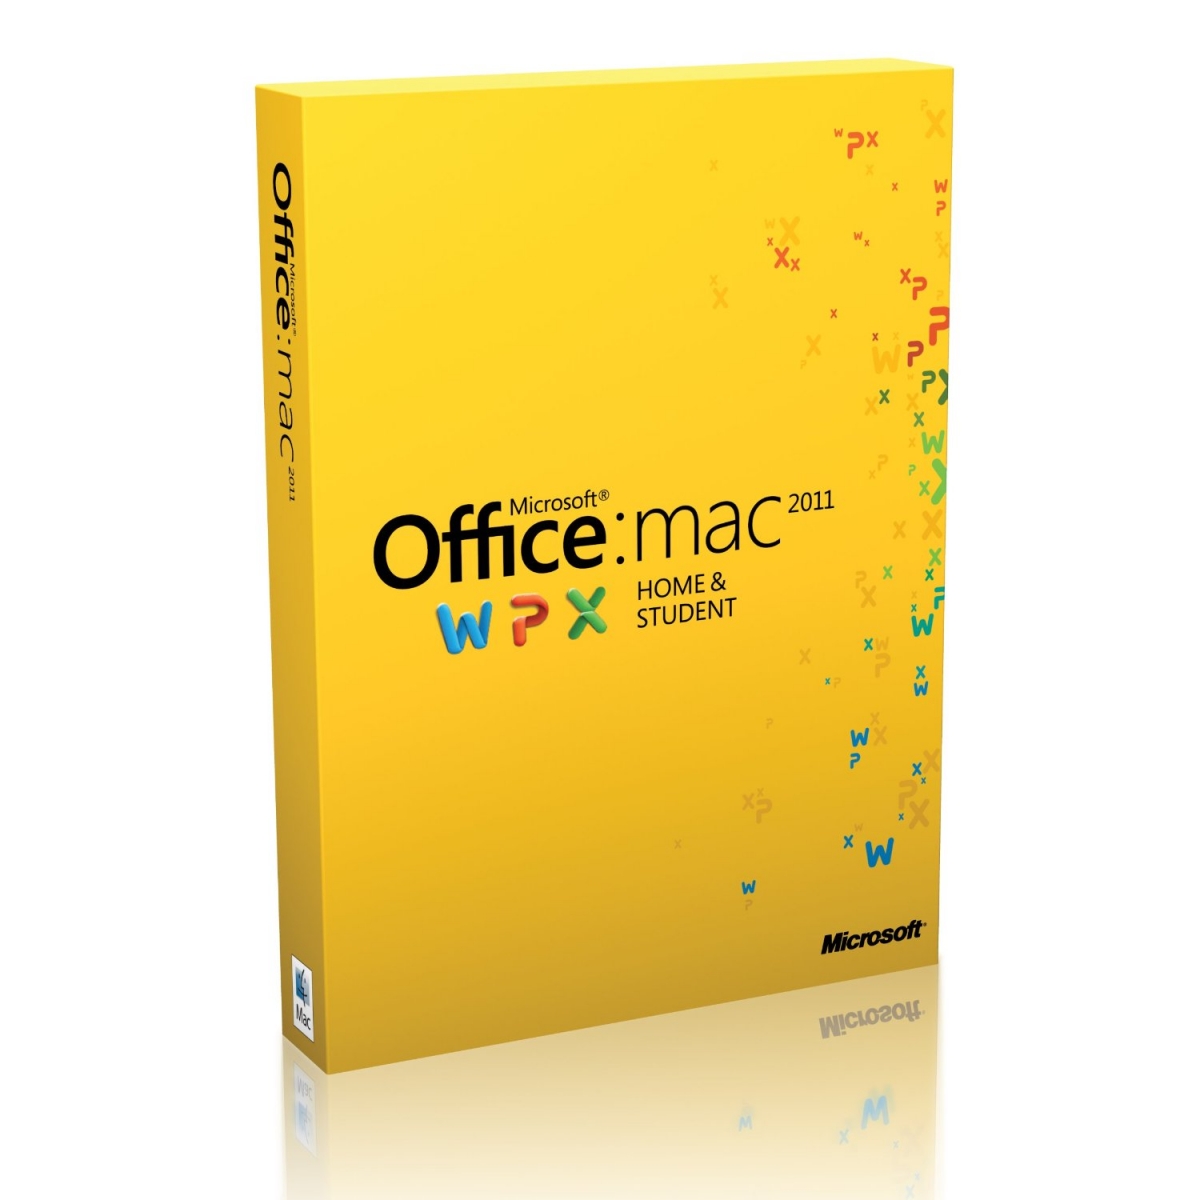 Download Microsoft Office 2011 Free Trial For Mac